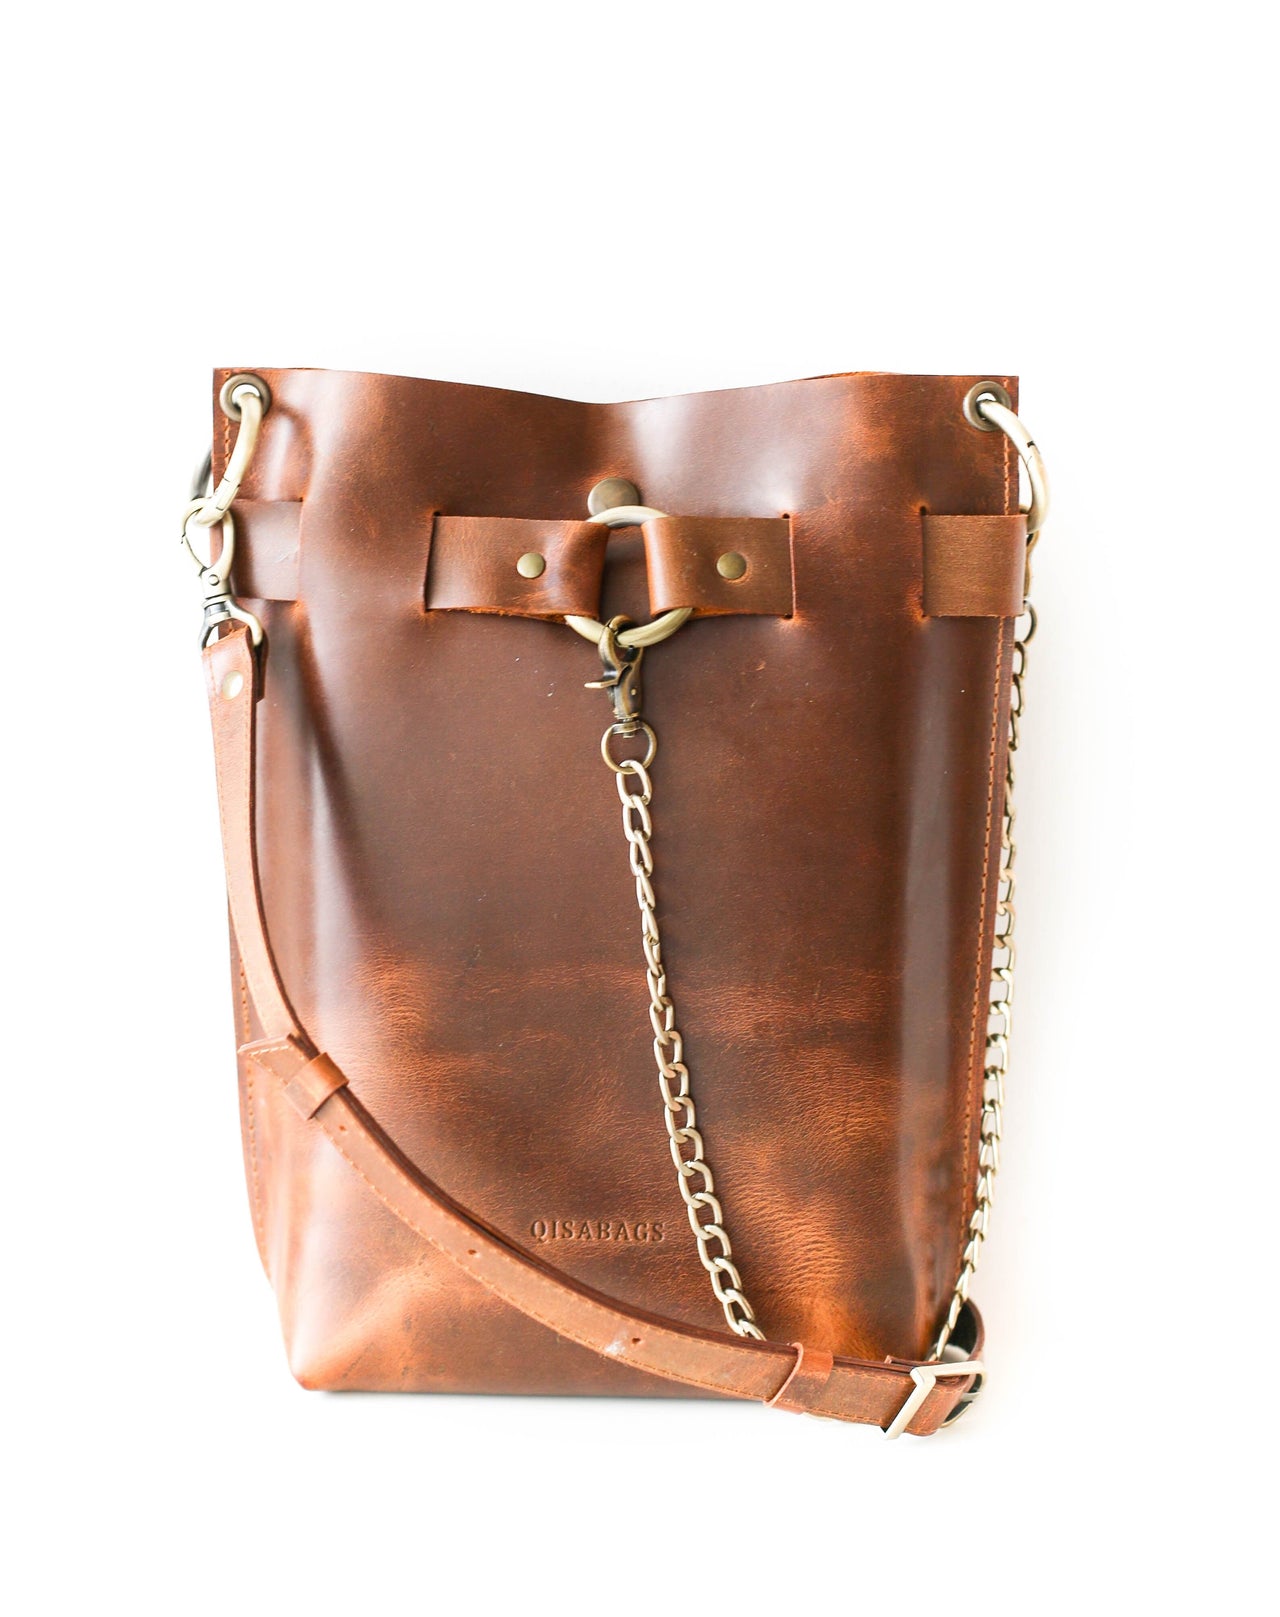 Coffee Brown Leather Bag - "Ring Belt Edition"